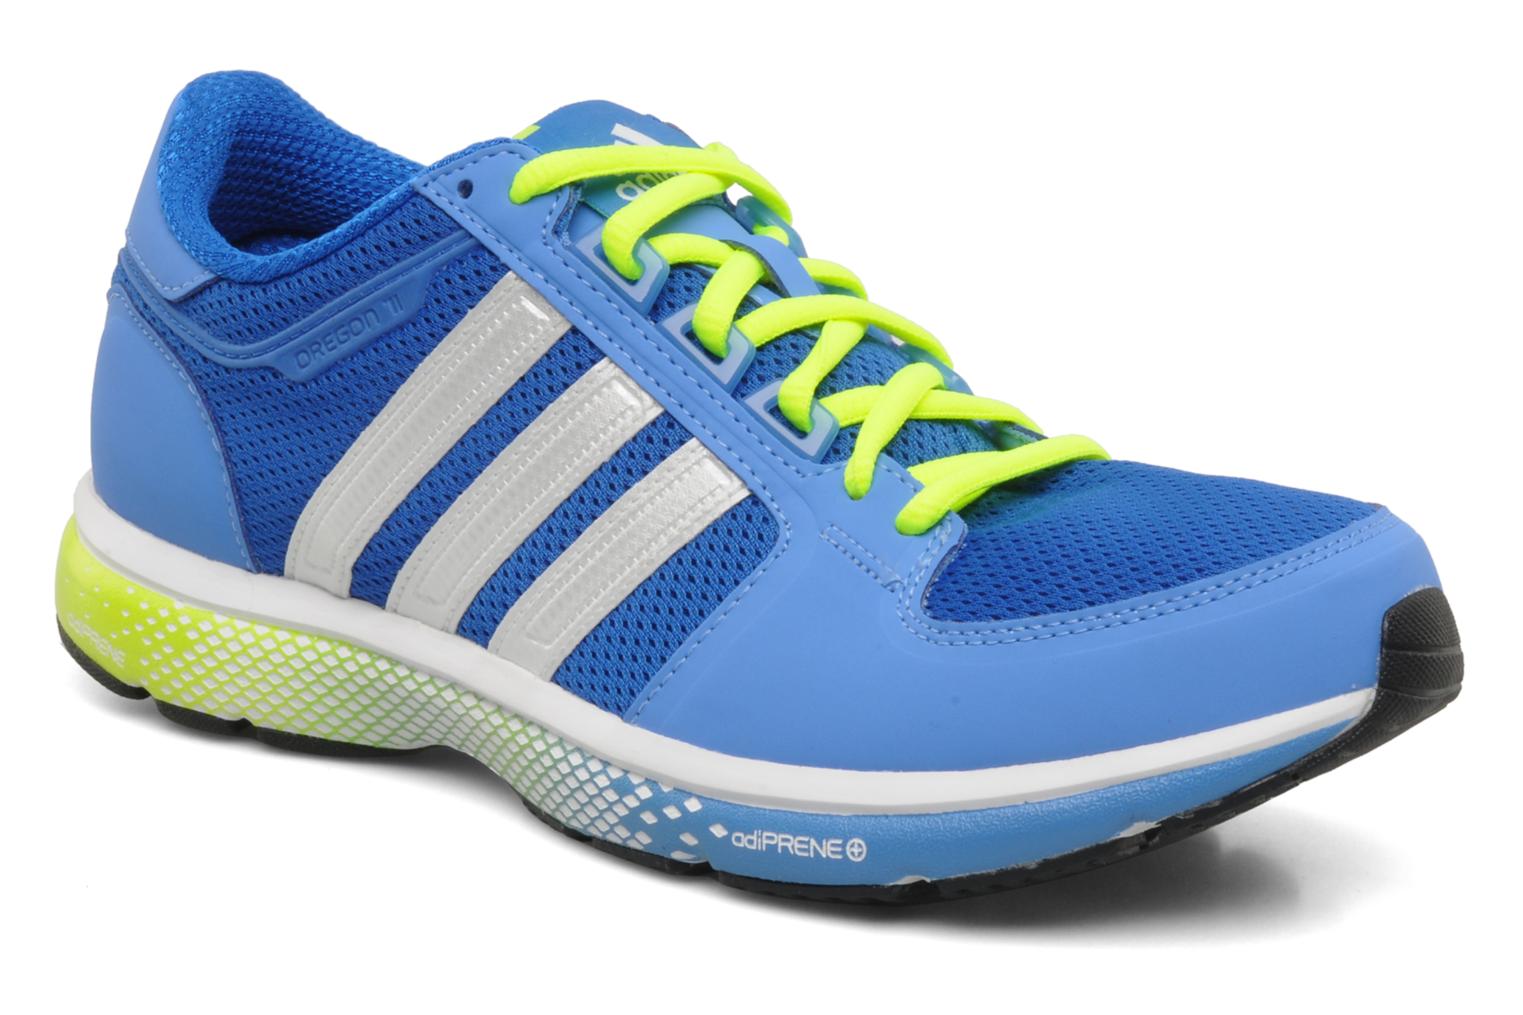 Adidas Performance Oregon 11 Sport shoes in Blue at Sarenza.co.uk (94538)